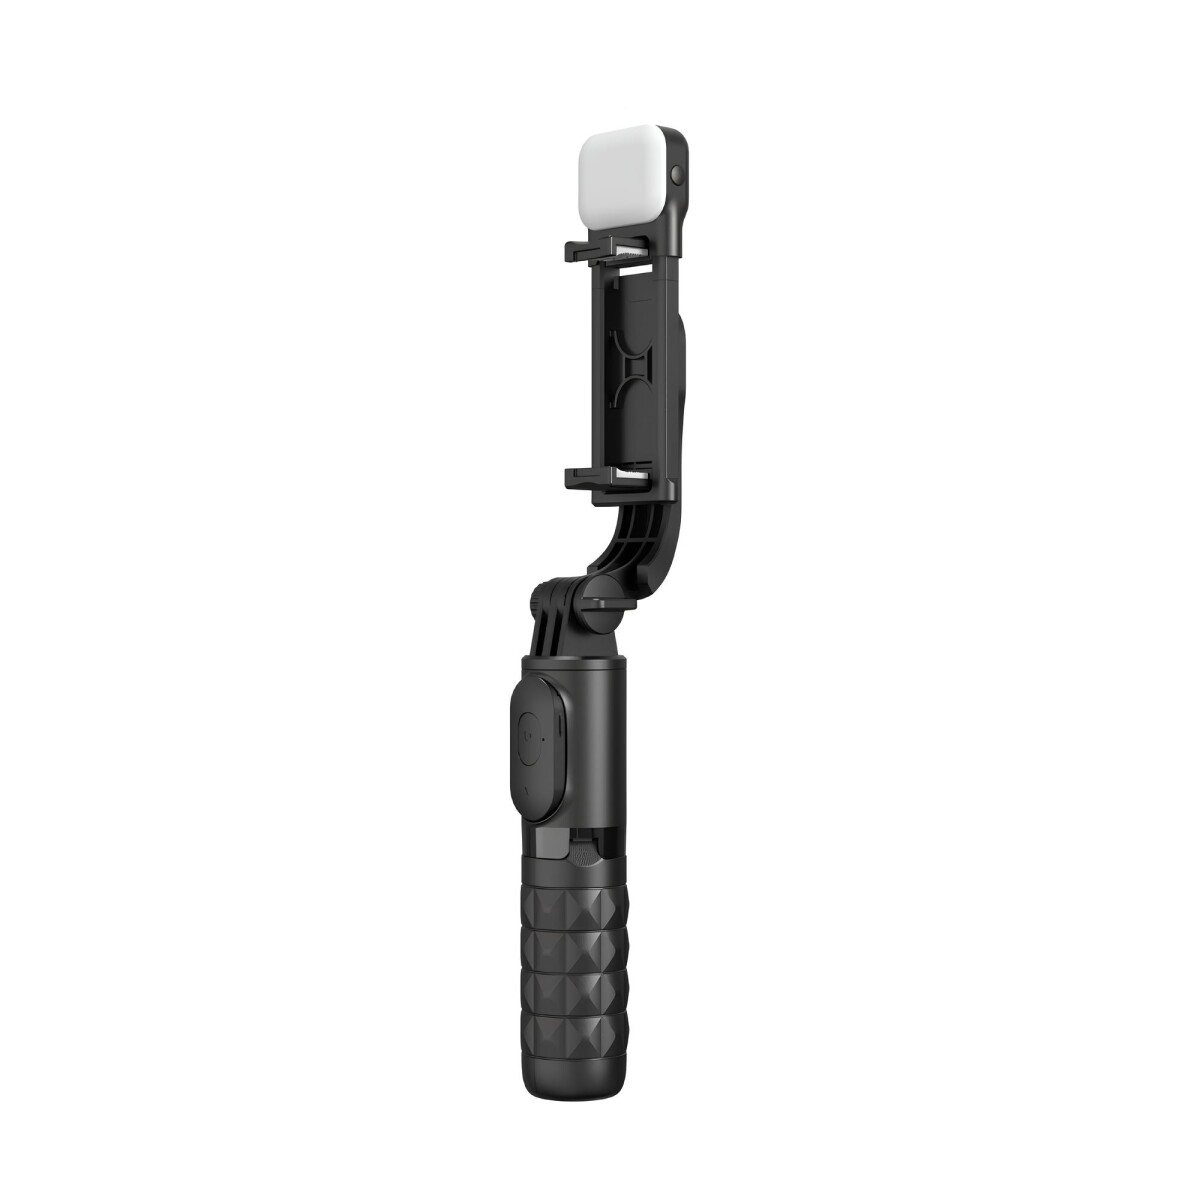 TRIPOD STAND DEVIA MULTI-FUNCTIONAL SELFIE BAR WITH FILL-IN LIGHT - Black 